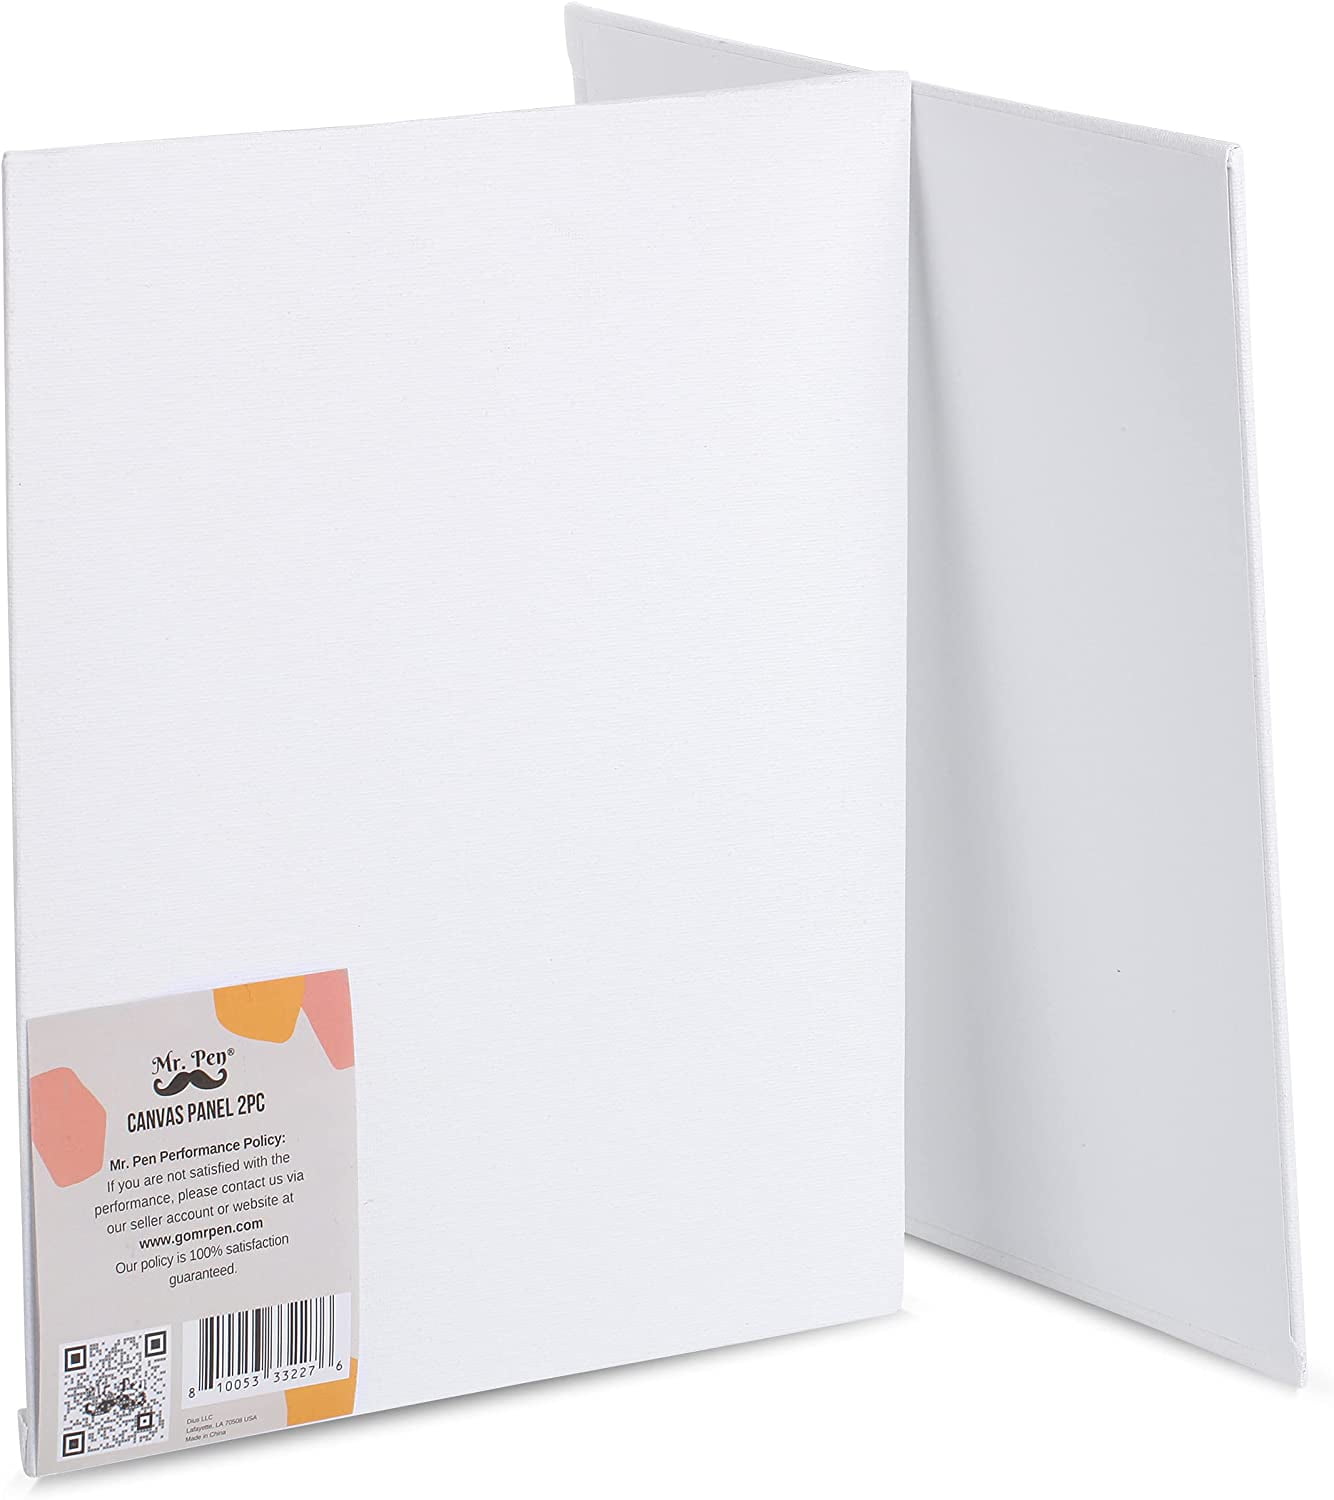 Hot Sale Primed Artlicious Canvas Panels, Cheap Price High Quality